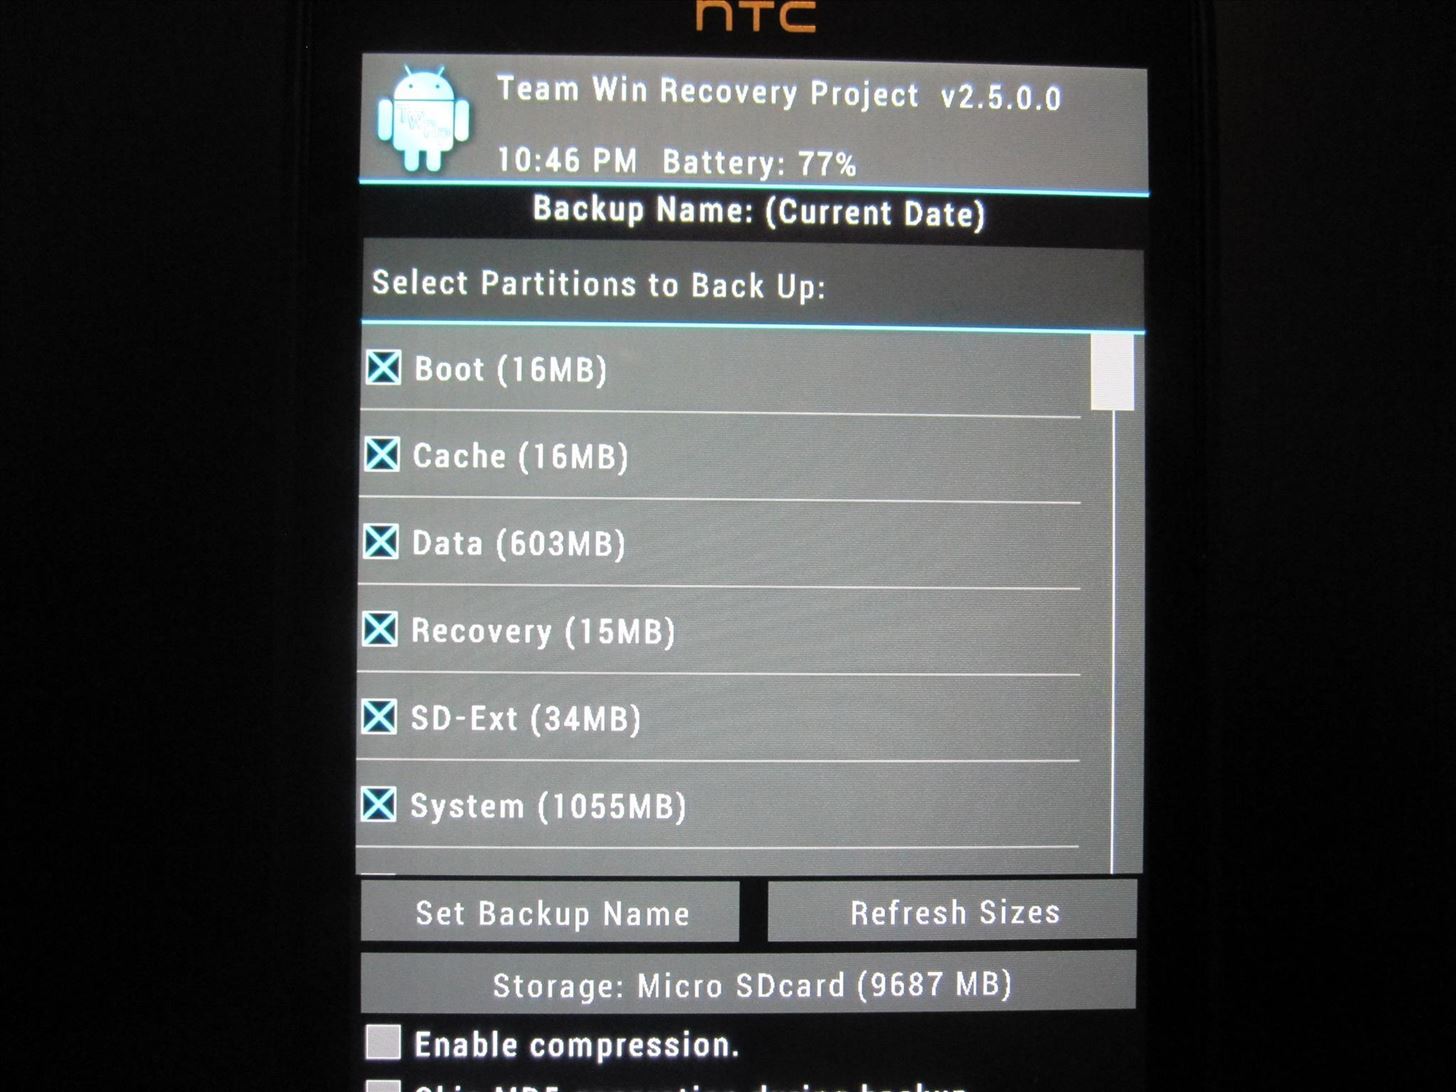 How to Remove OEM Skins & Carrier Bloatware on Your HTC EVO 4G LTE with CyanogenMod